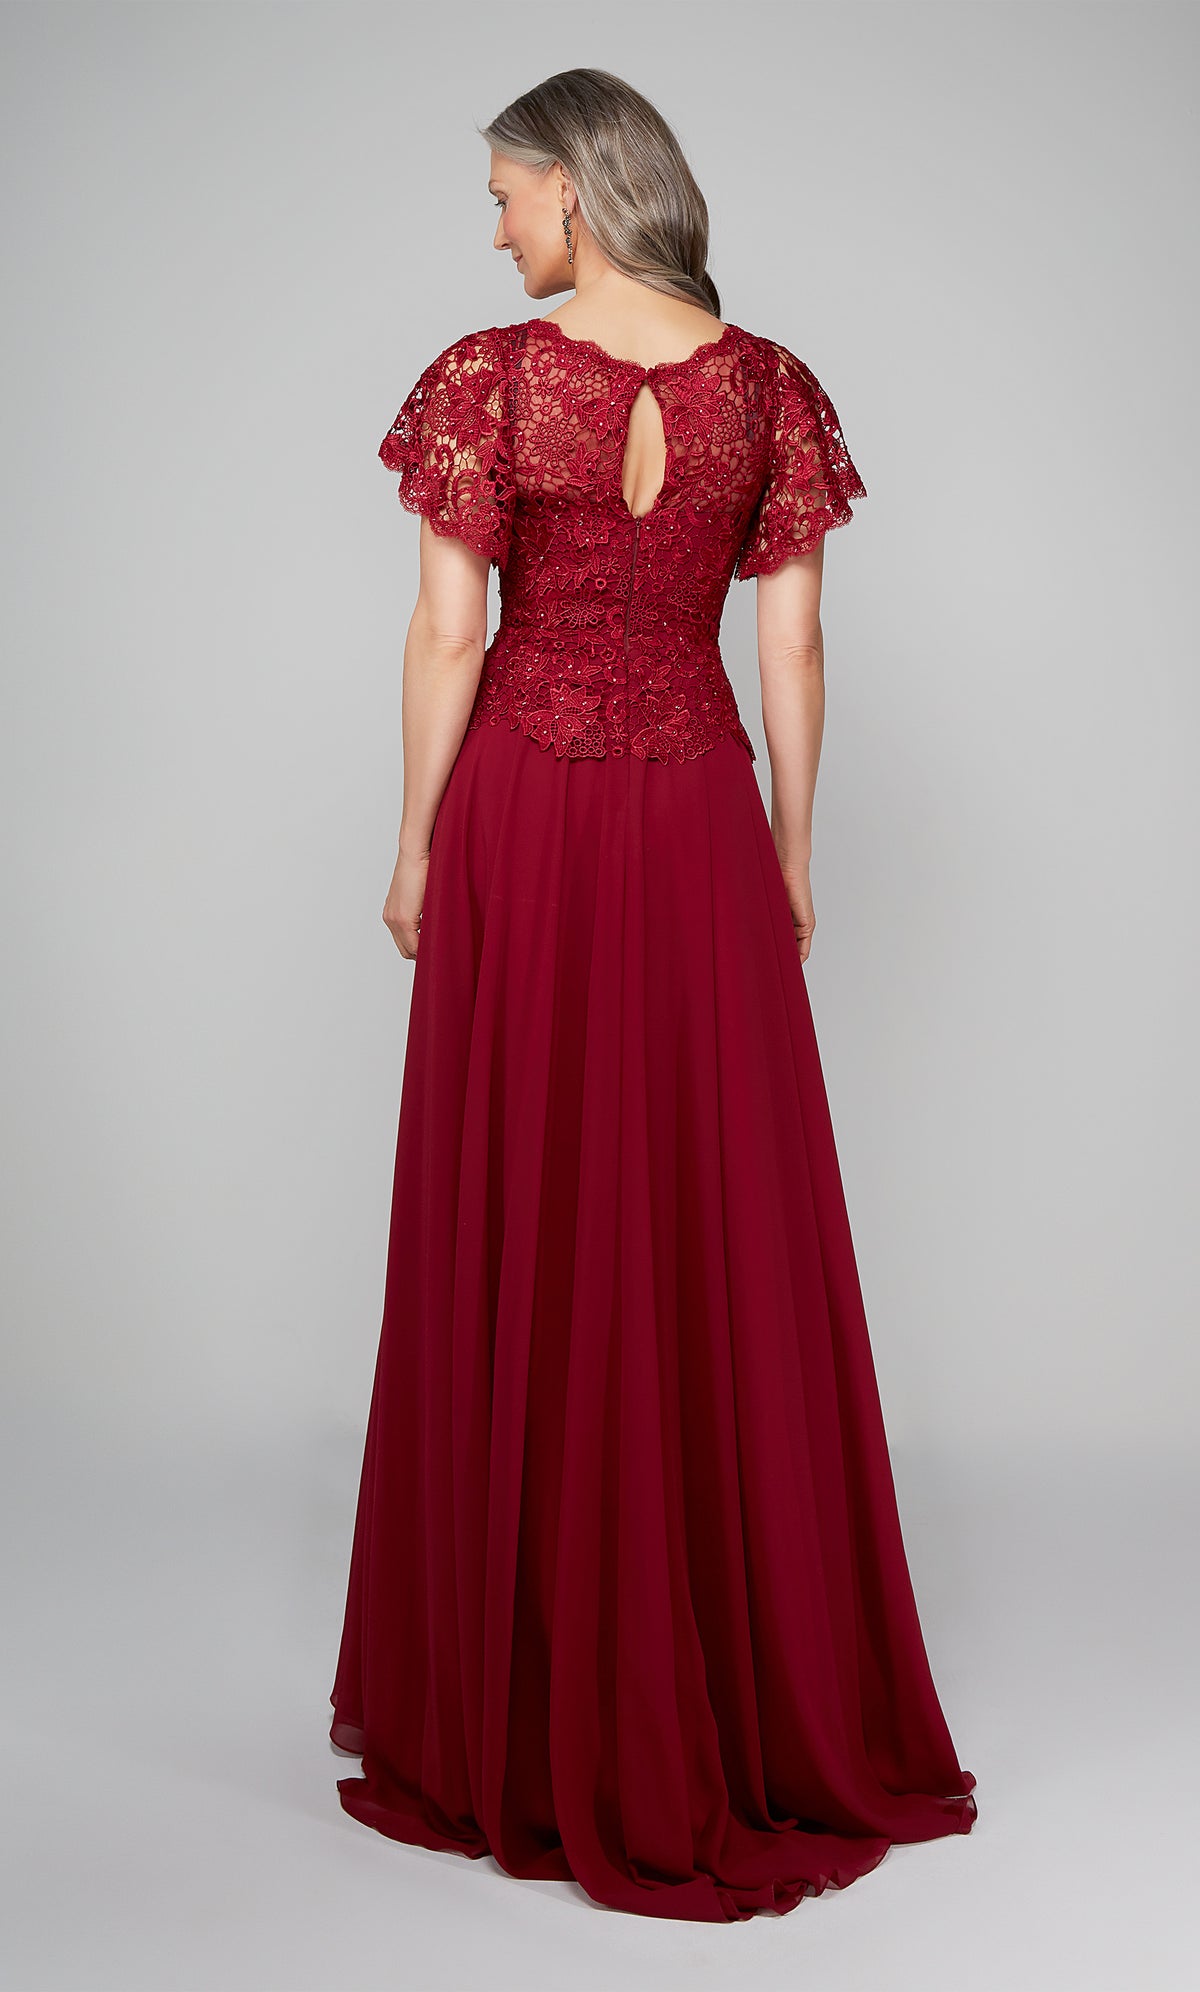 Long formal dress with lace peplum top with butterfly sleeves, a keyhole back, and an flowy chiffon skirt in wine red.